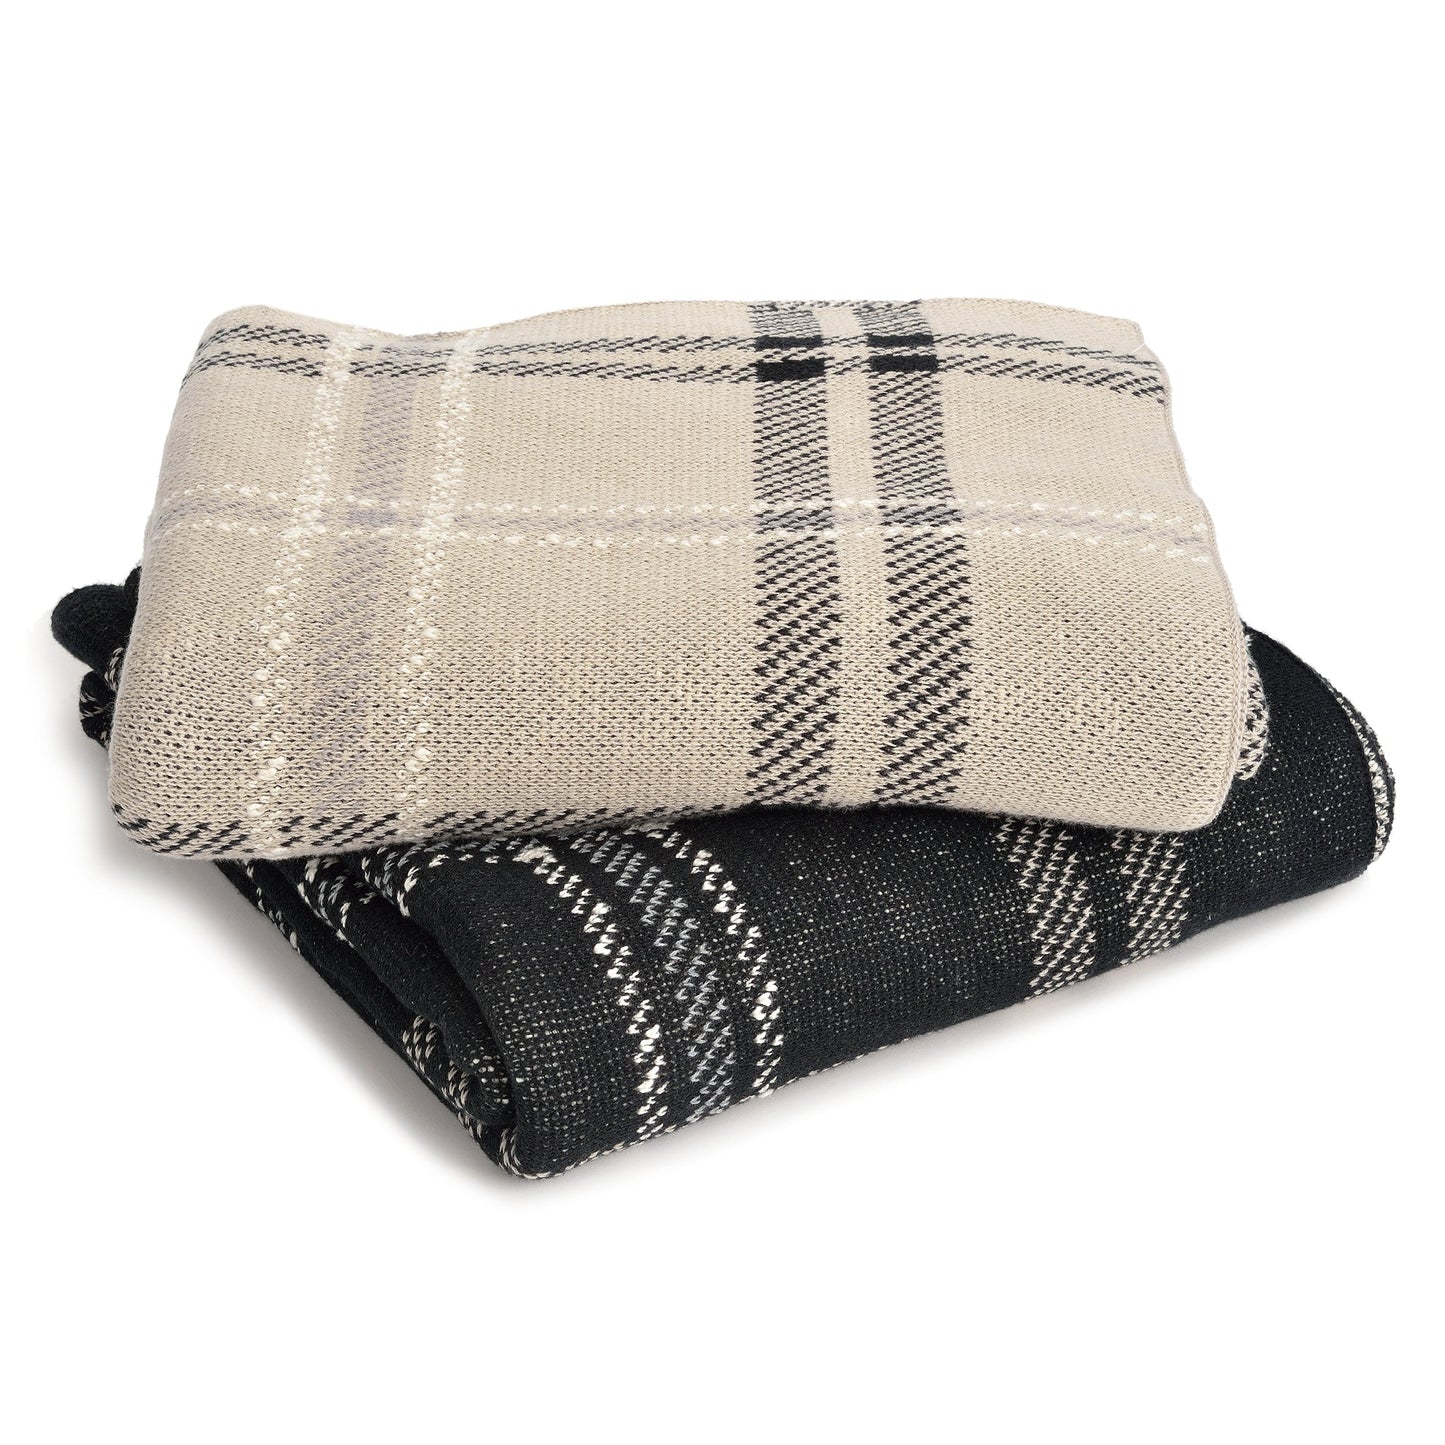 Oliver Plaid Pillow and Throw Set - Black